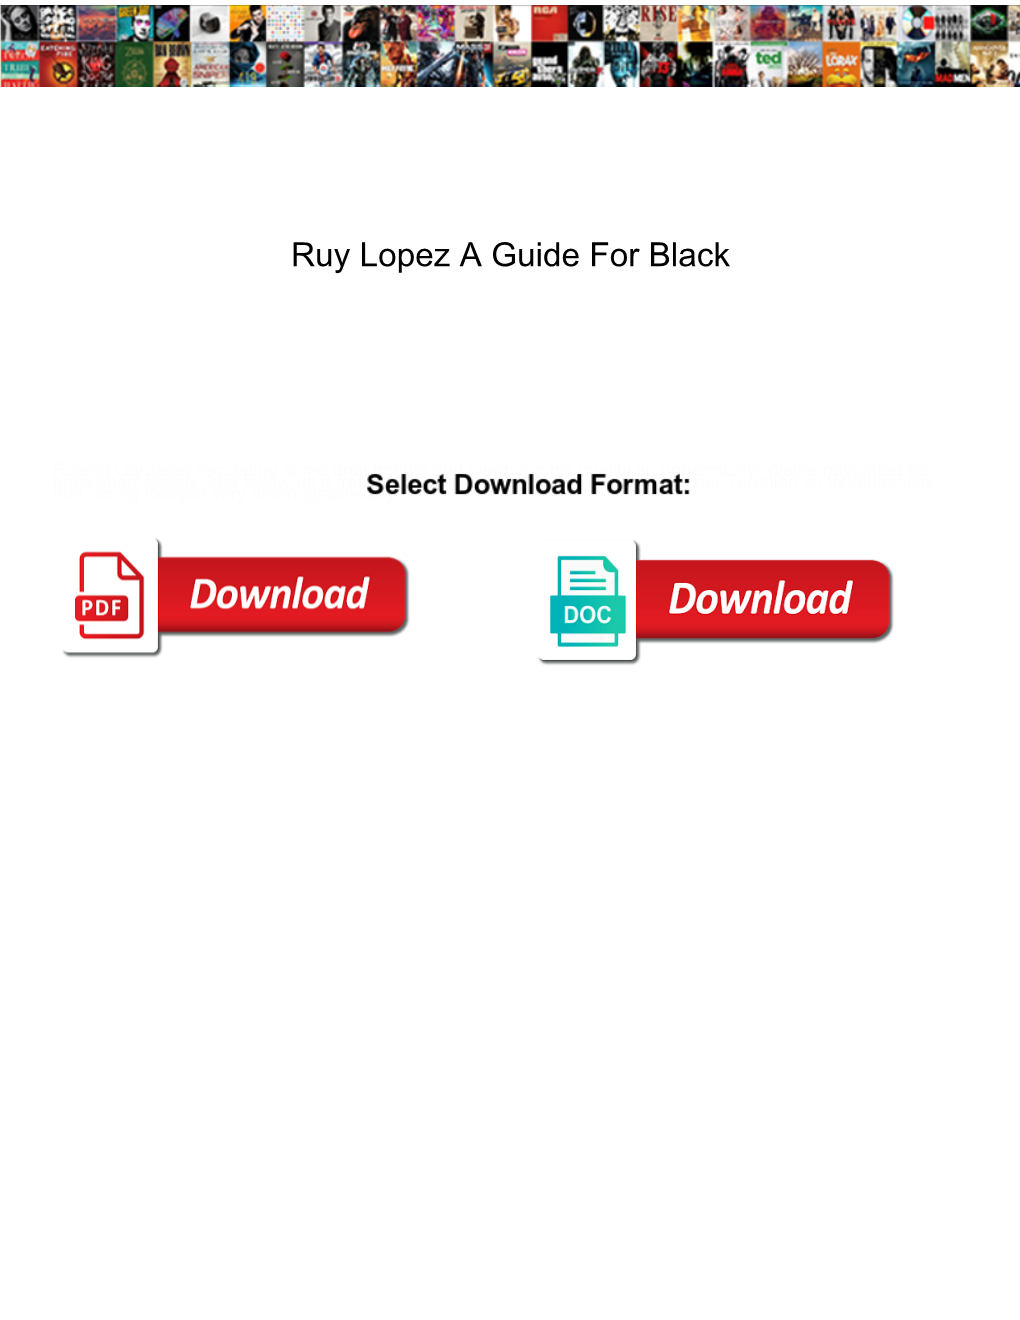 Ruy Lopez a Guide for Black